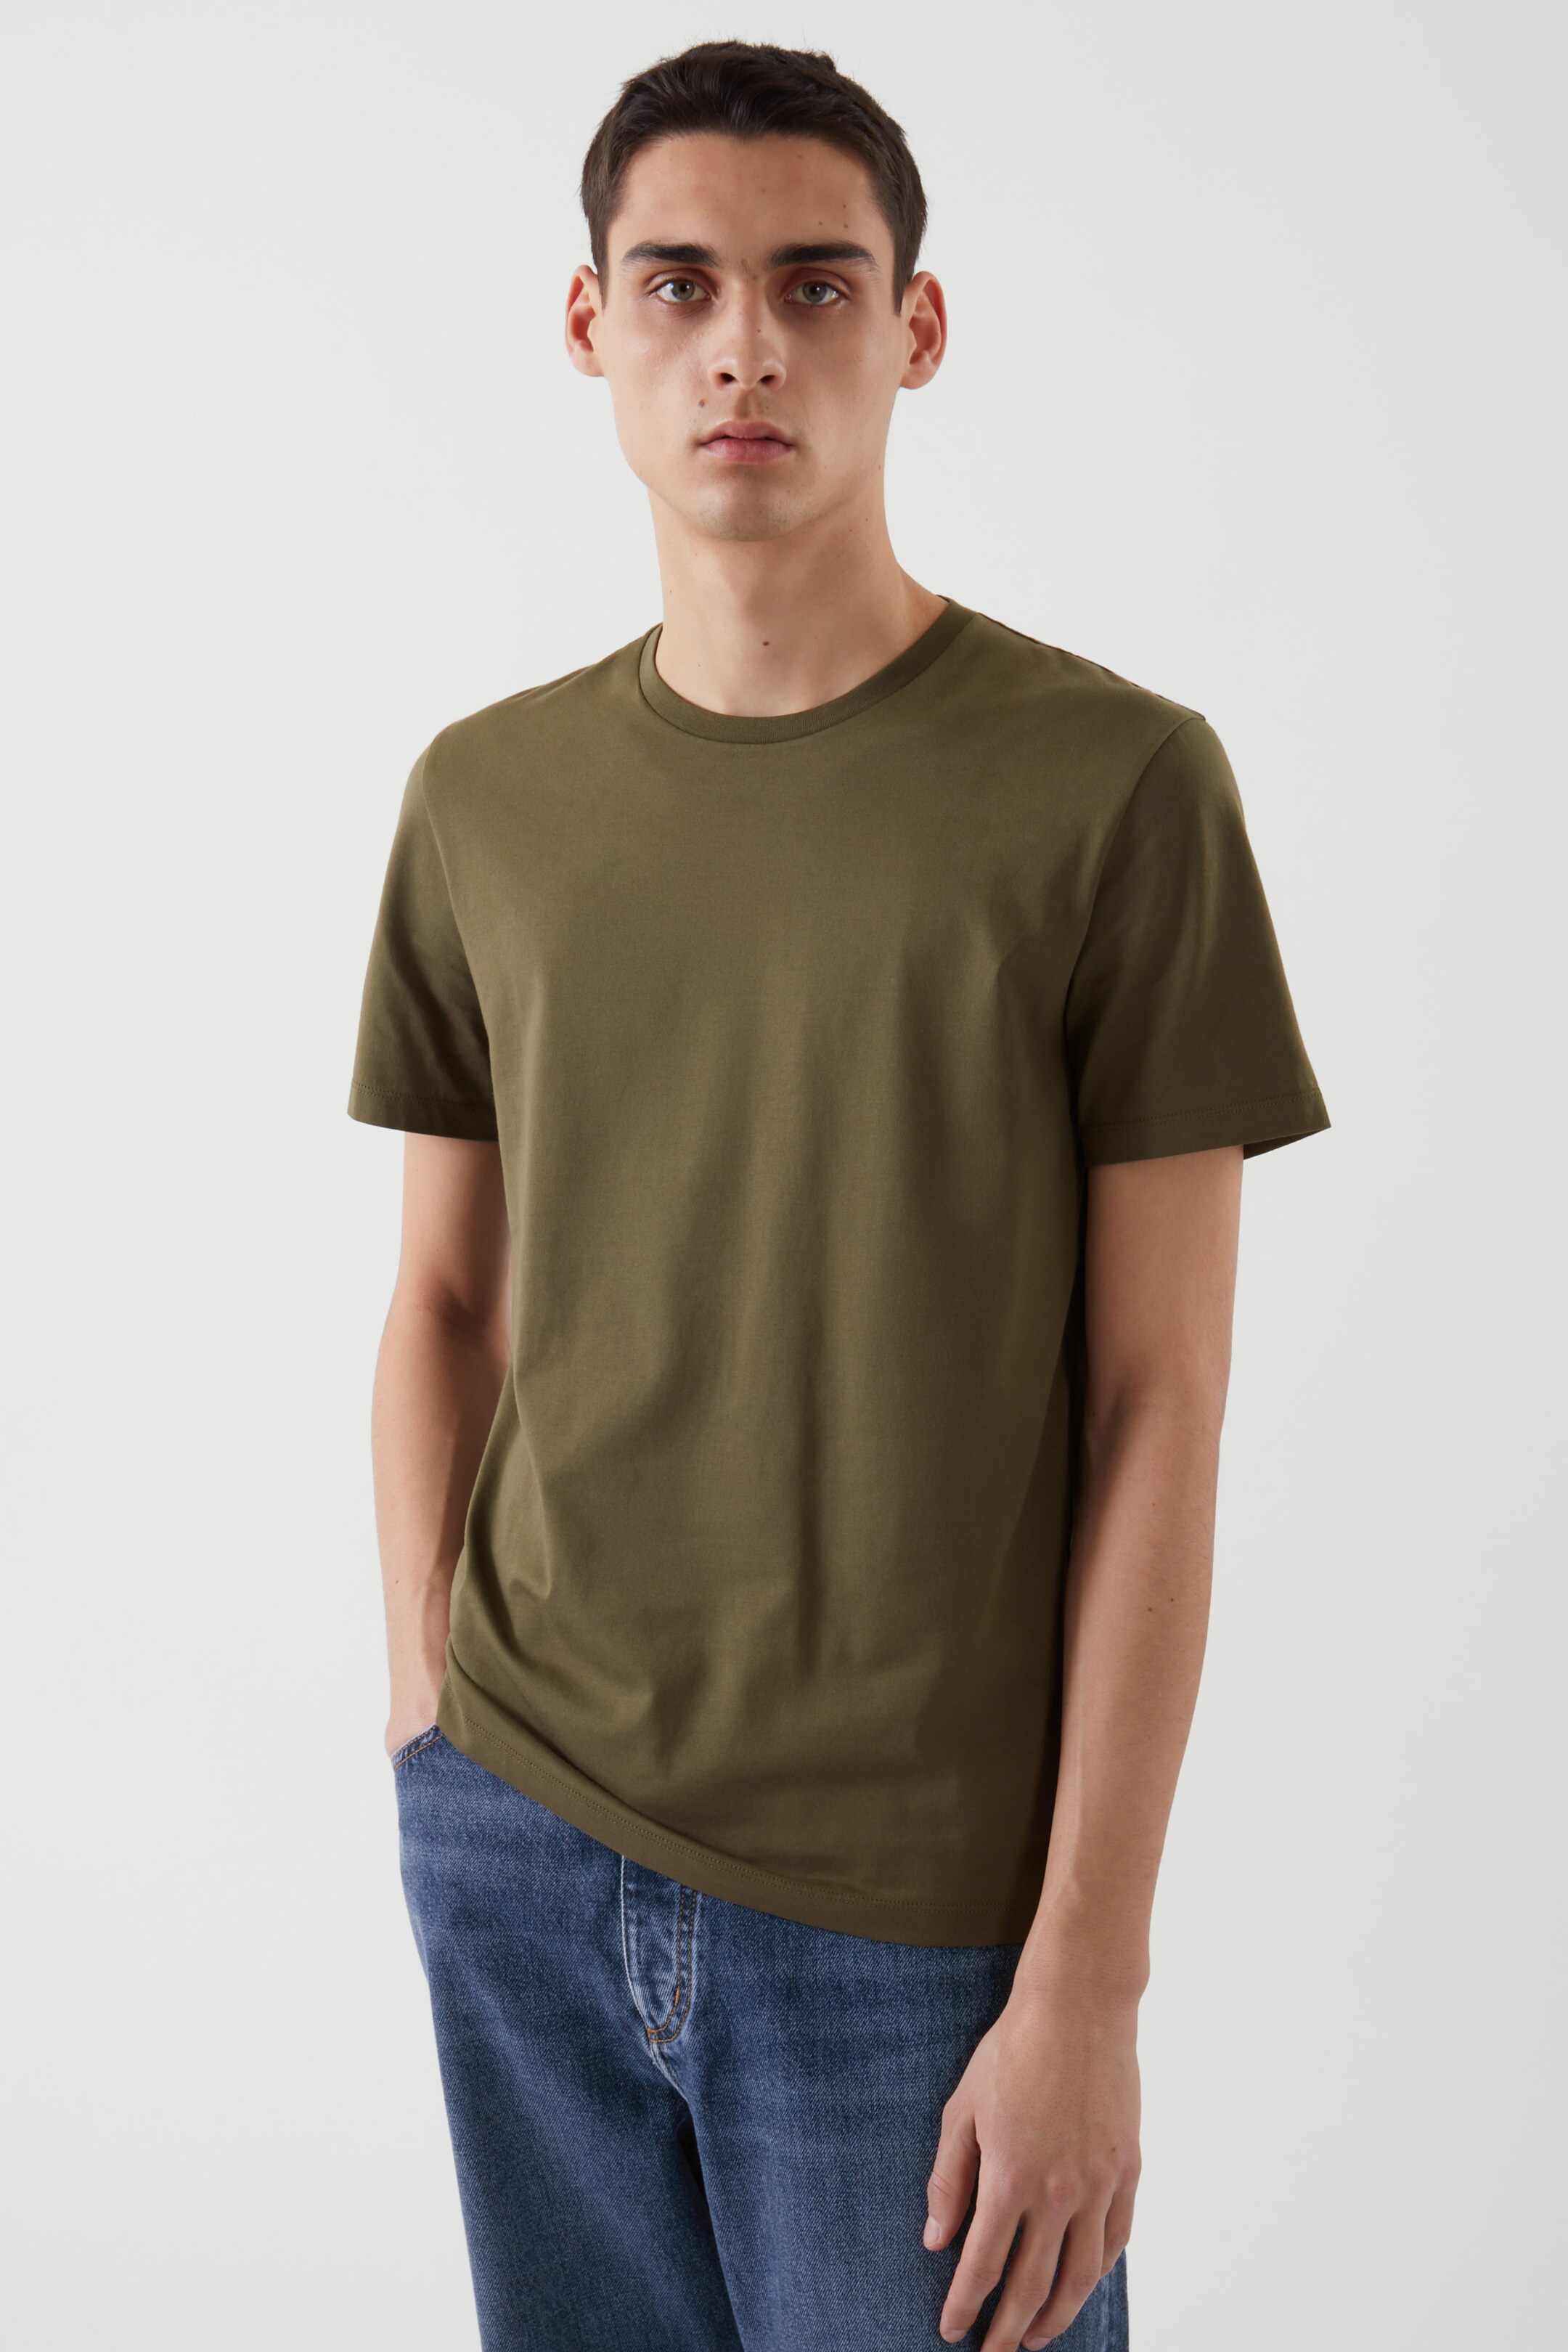 Front image of cos REGULAR-FIT LIGHTWEIGHT T-SHIRT in KHAKI